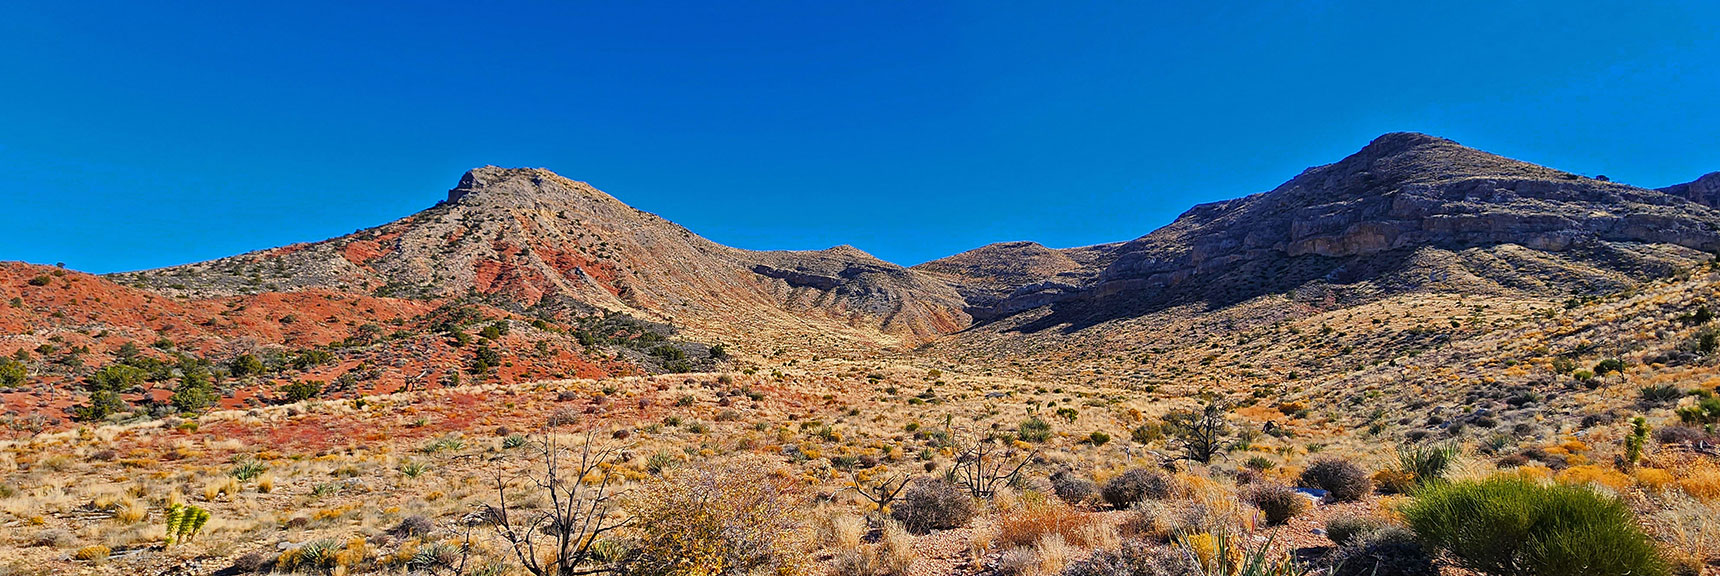 View into the North Canyon. North (left) Side Has Potential Summit Approaches. | Landmark Bluff Circuit | Lovell Canyon, Nevada